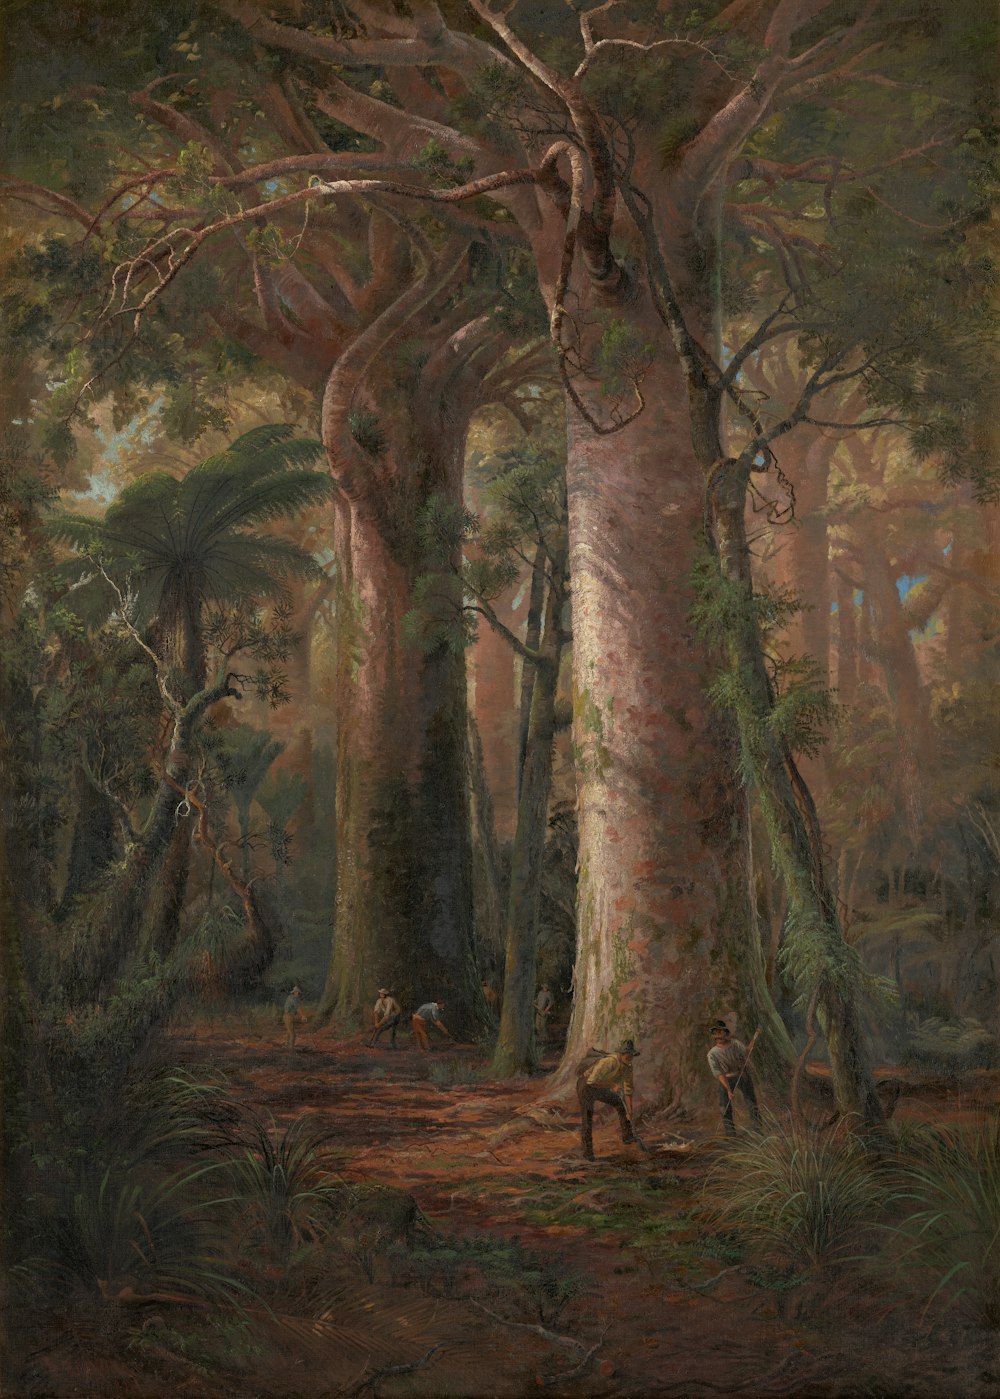 a painting of a forest with trees and animals